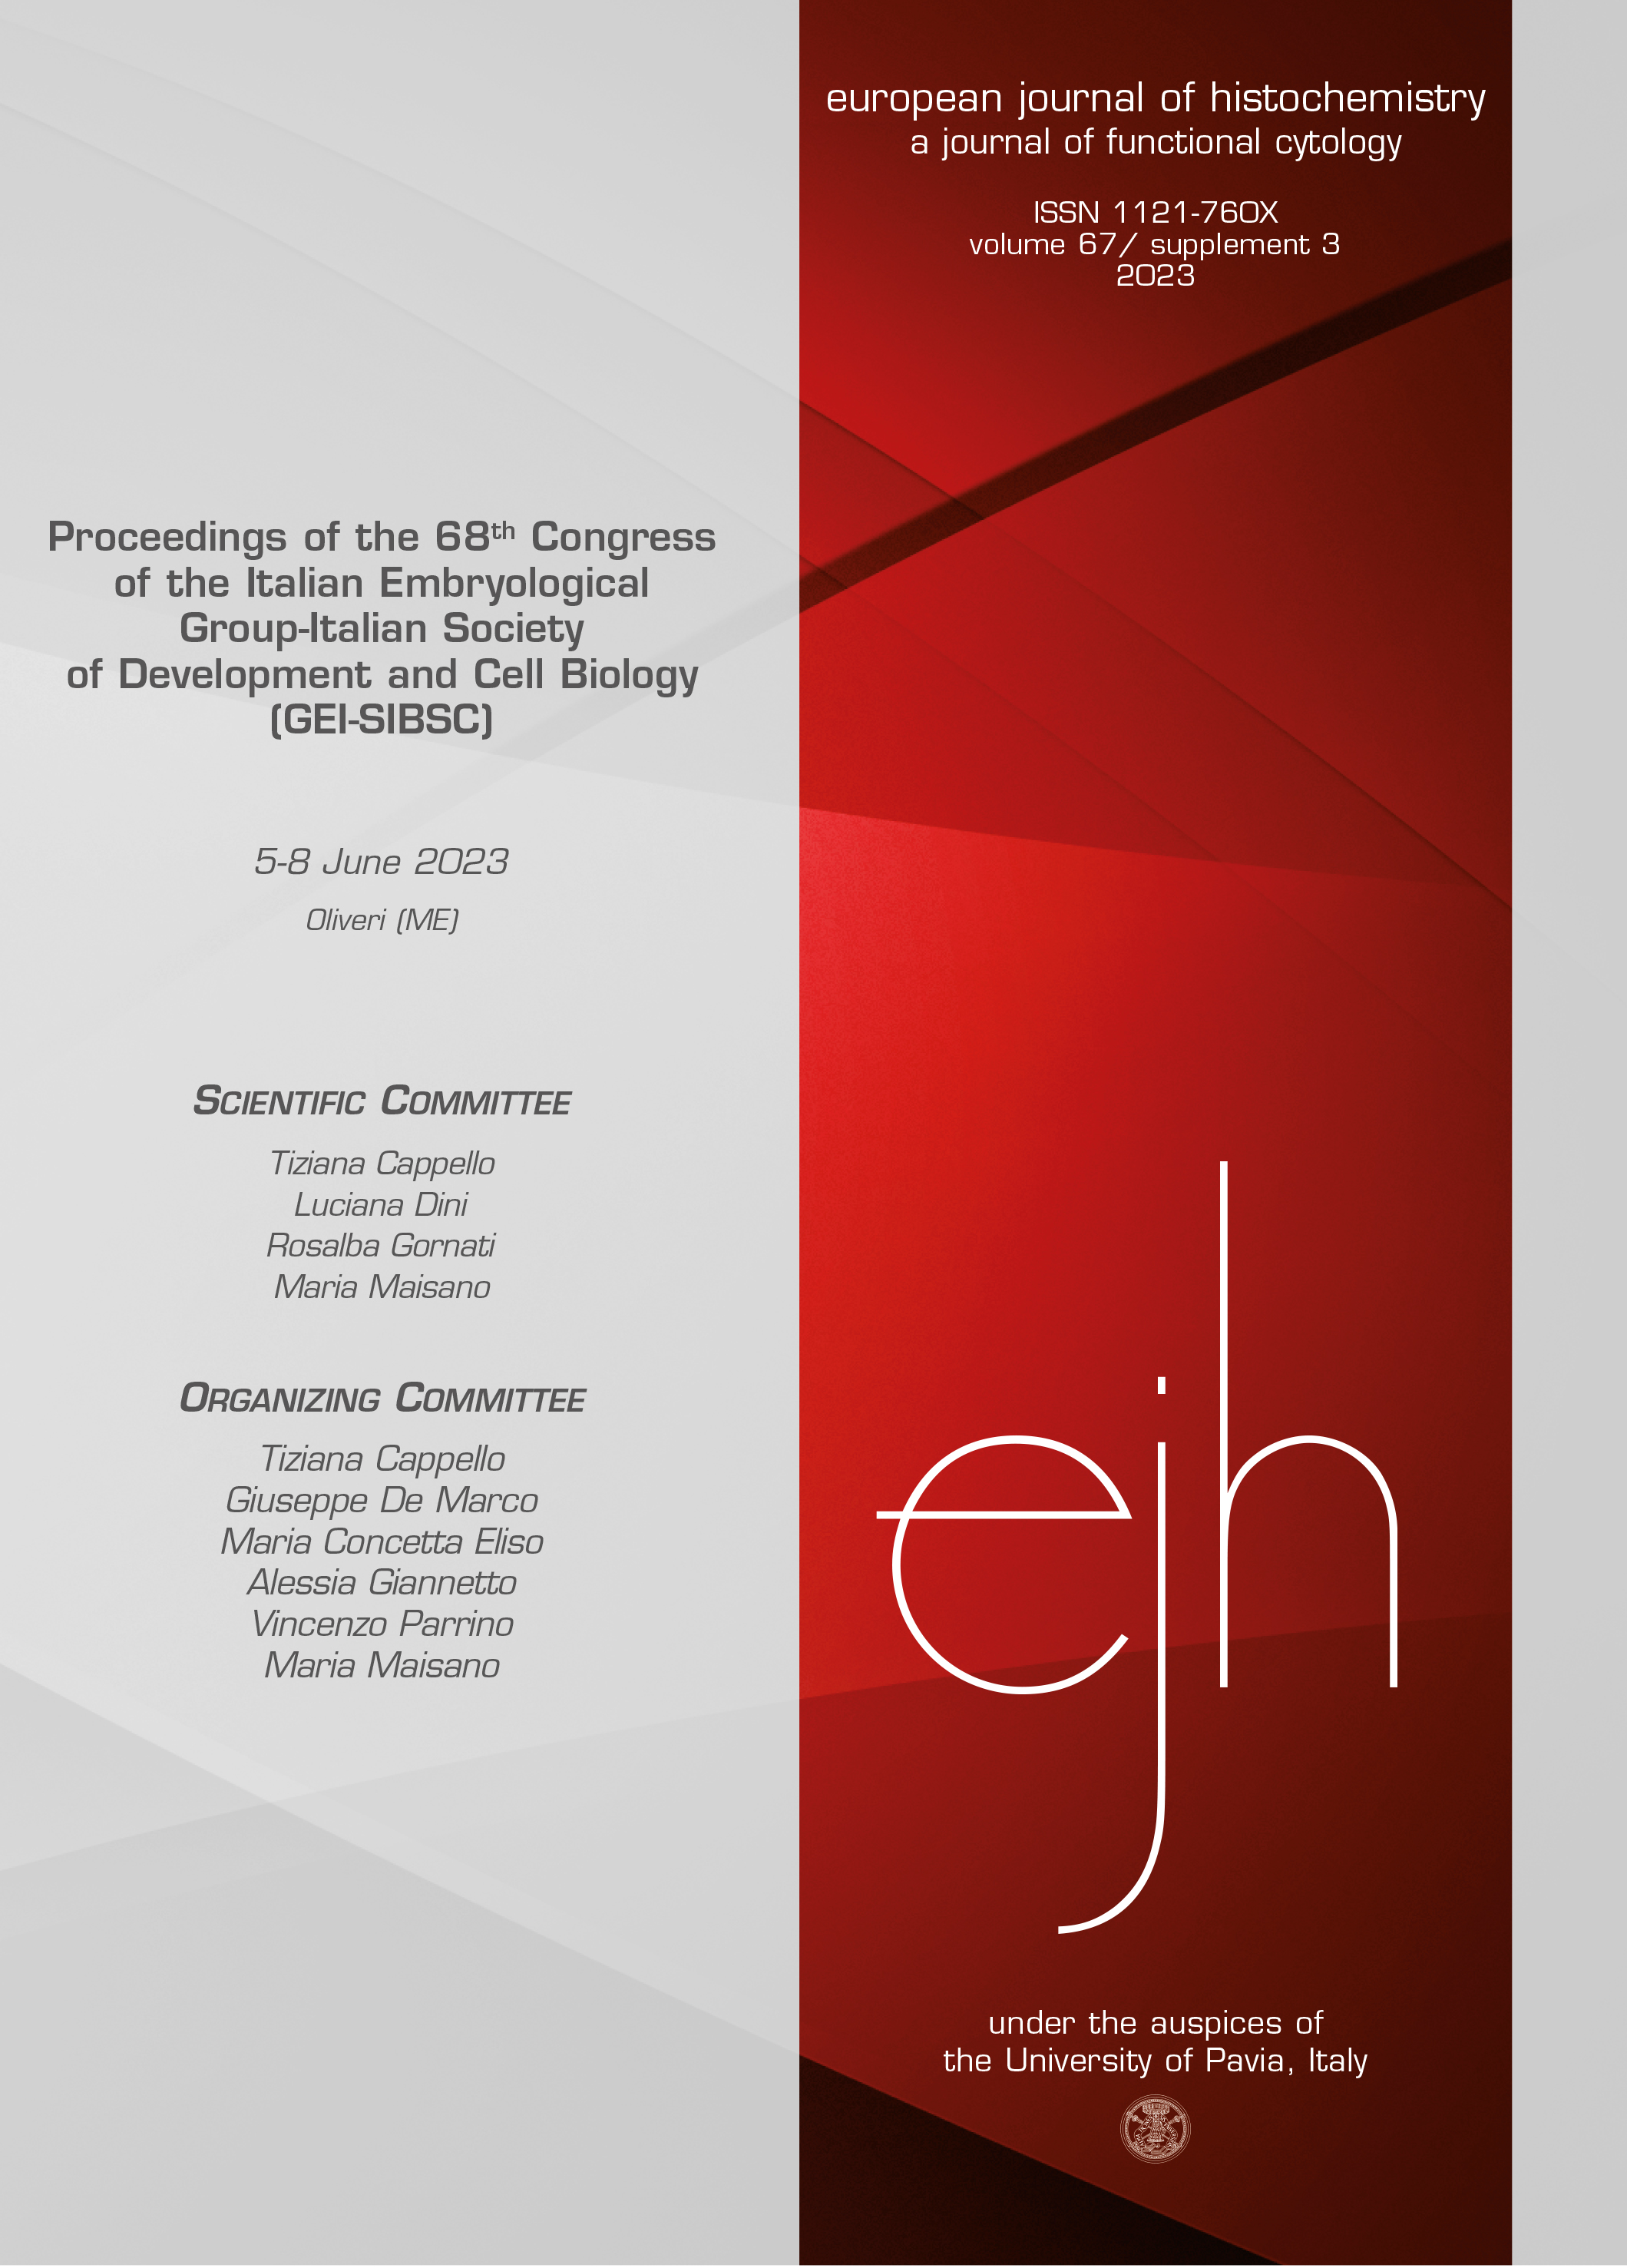 					View Vol. 67 No. s3 (2023): Proceedings of the 68th Congress of the Italian Embryological Group-Italian Society of Development and Cell Biology (GEI-SIBSC) -  Oliveri, 5-8 June 2023
				